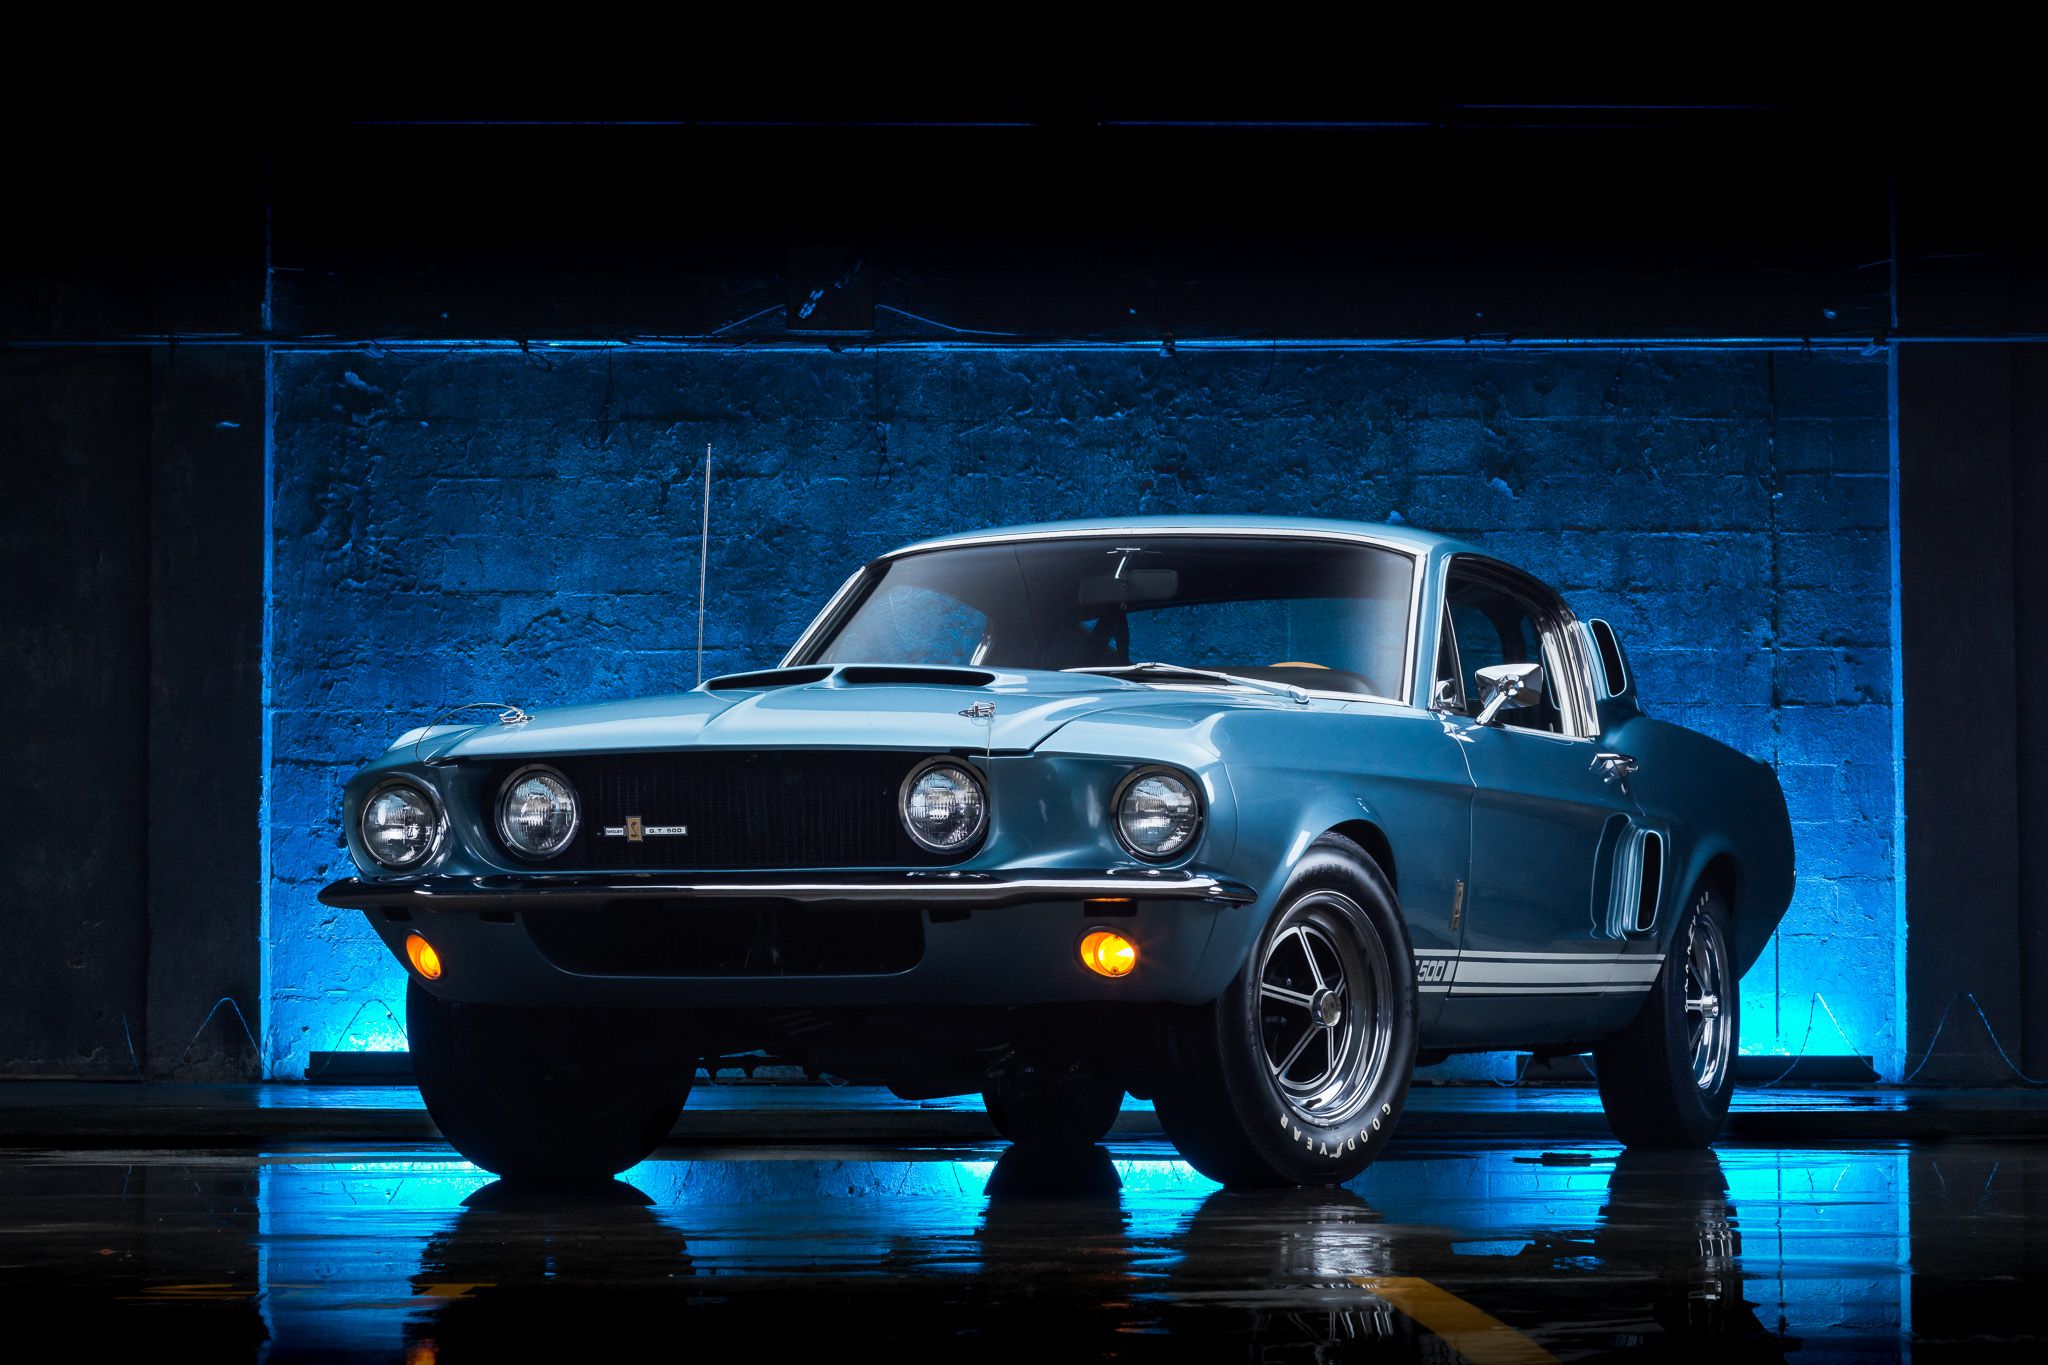 What was the engine in a '67 Shelby G.T. 500 called, exactly?